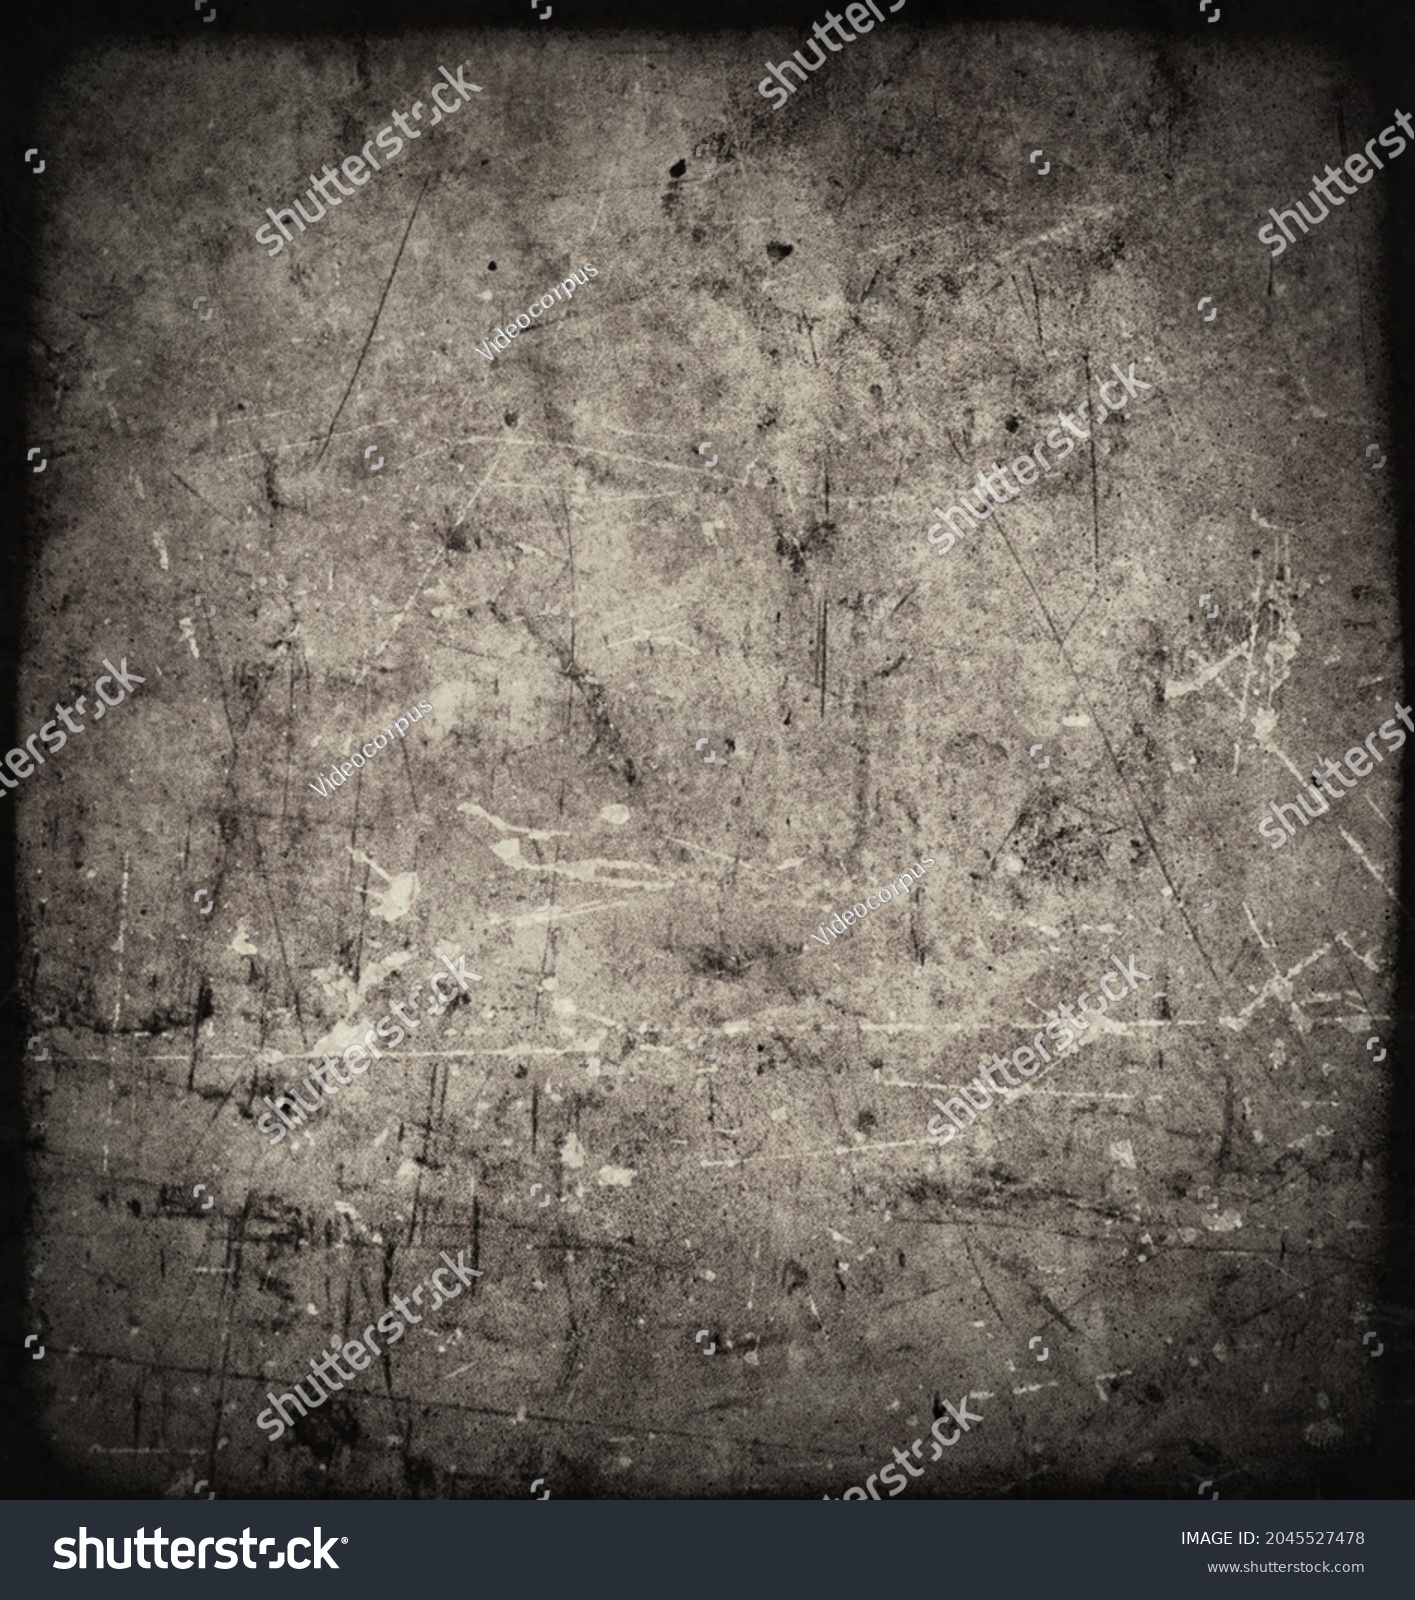 Shabby grunge texture of the background. Natural noises, scratches and aging.
Different shades of the old wall. #2045527478